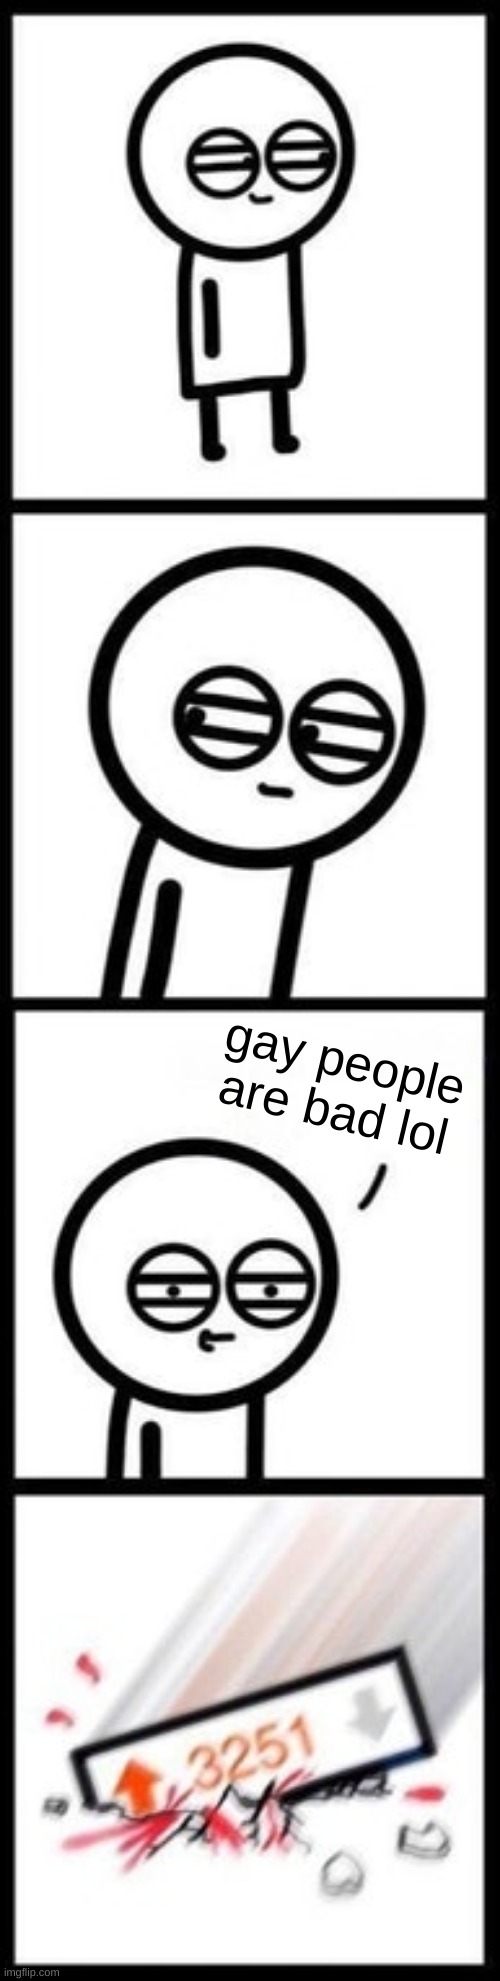 msmg in a nutshell | gay people are bad lol | image tagged in memes,funny,3251 upvotes,homophobic,msmg,upvotes | made w/ Imgflip meme maker